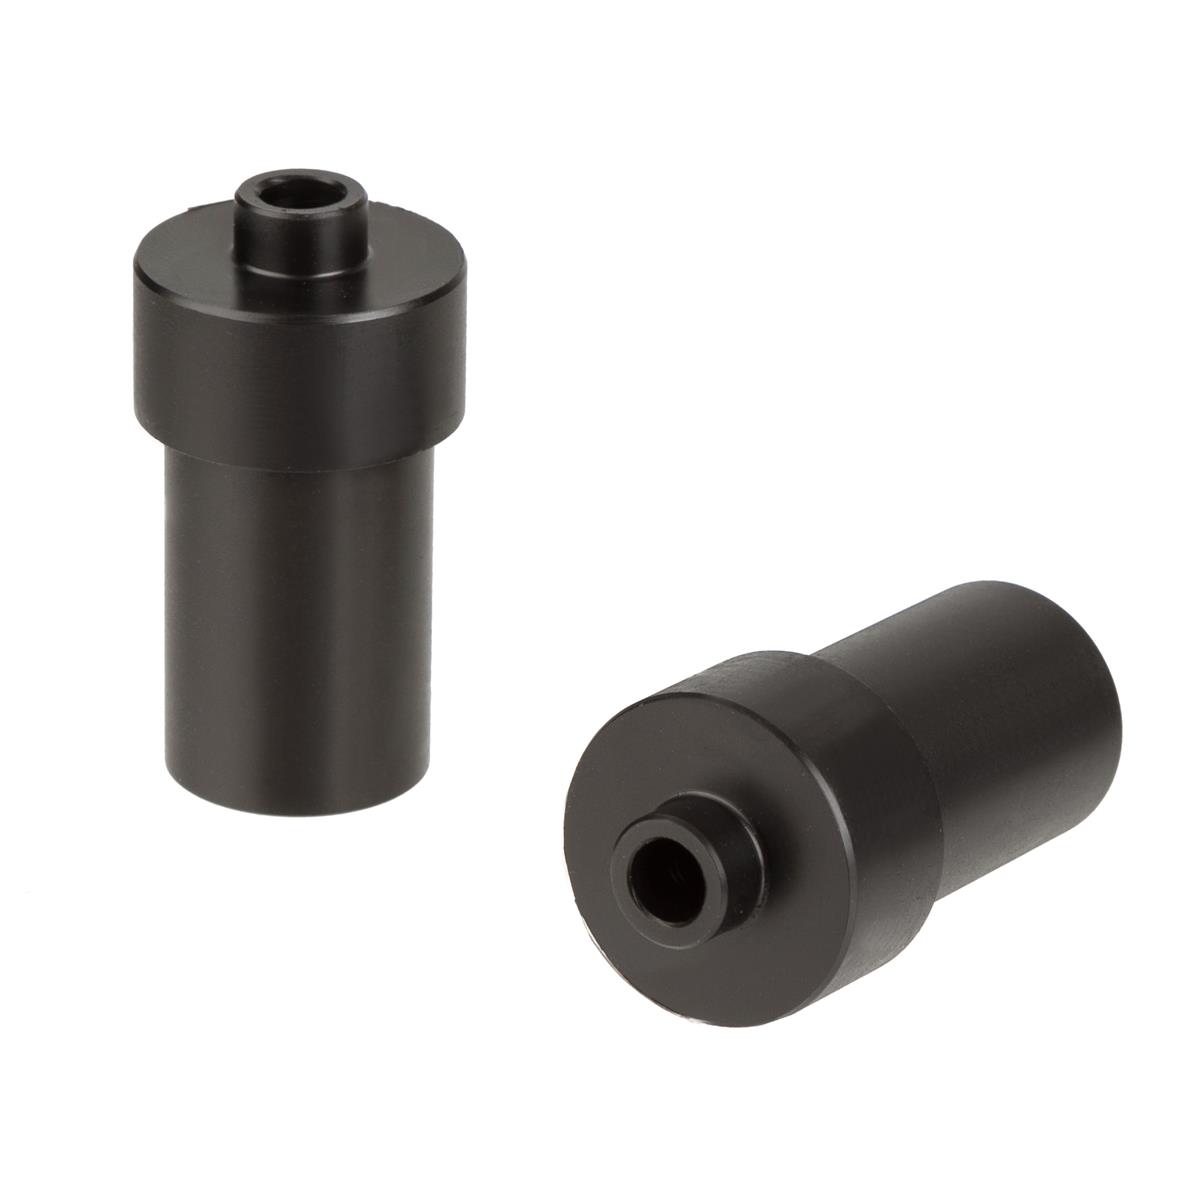 Unior Adapter  For 20 mm Quick Release Axle